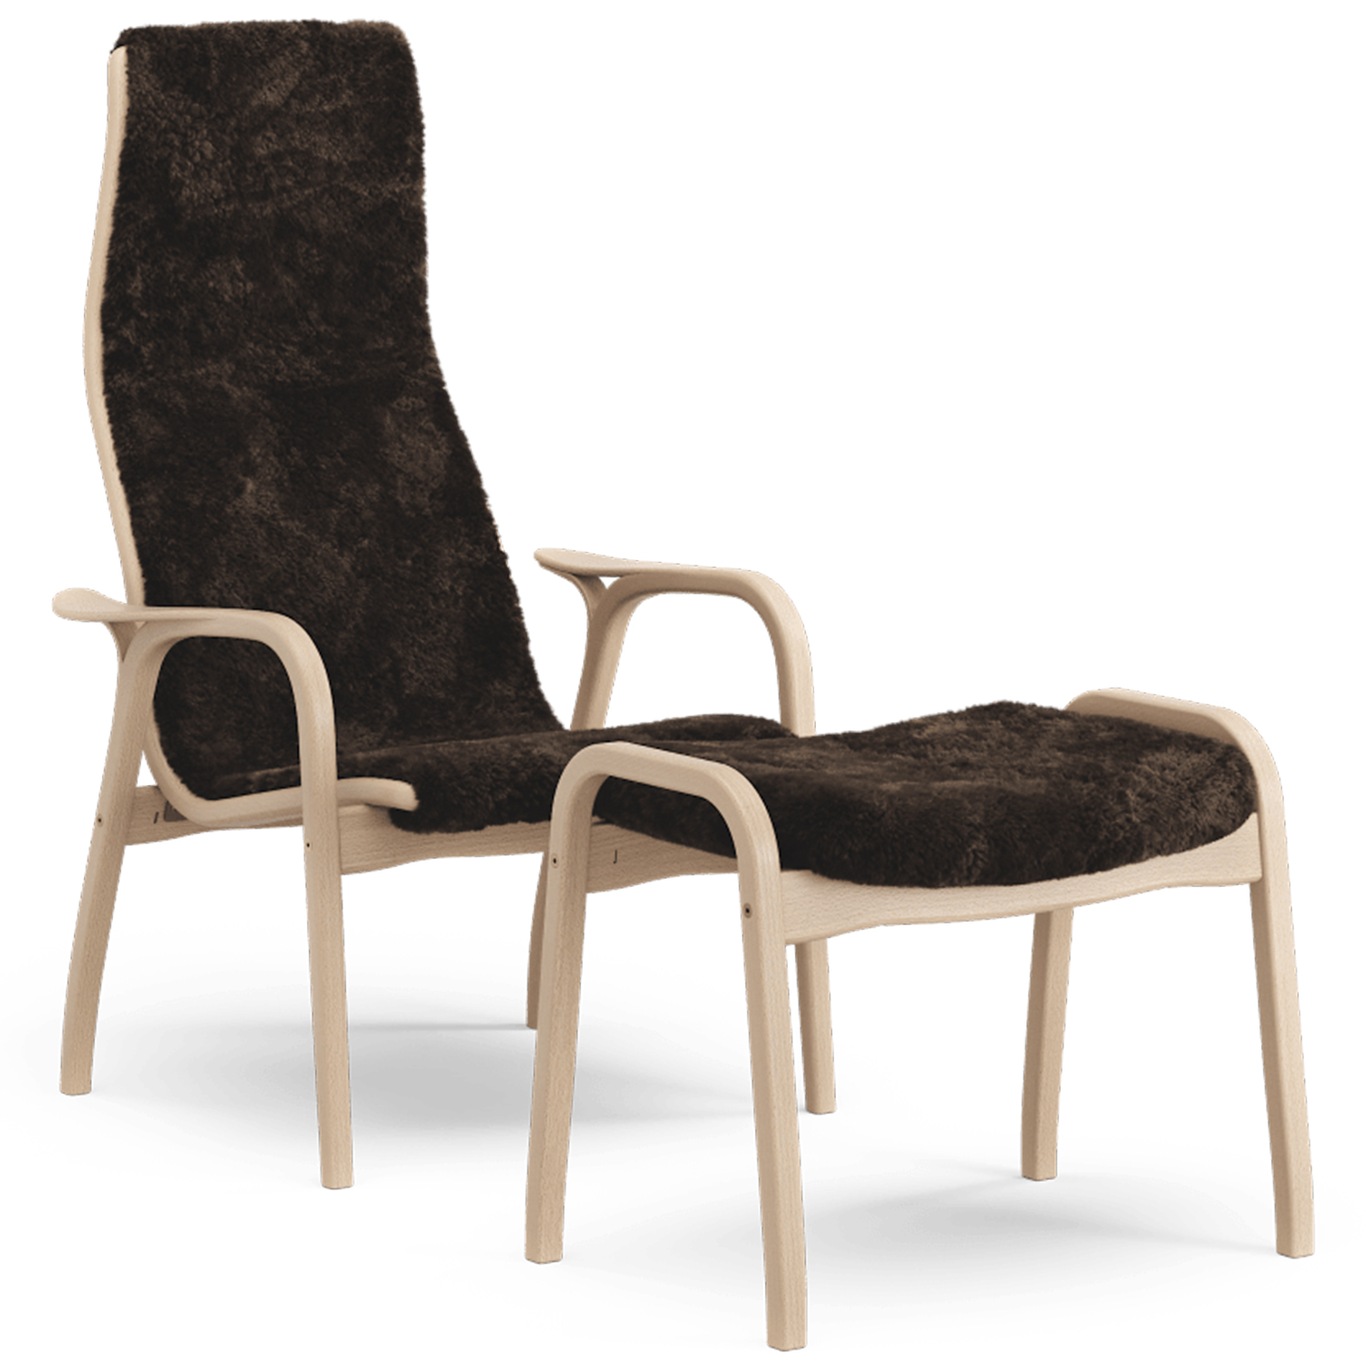 Lamino Armchair With Footstool Sheepskin, Espresso / Lacquered Beech